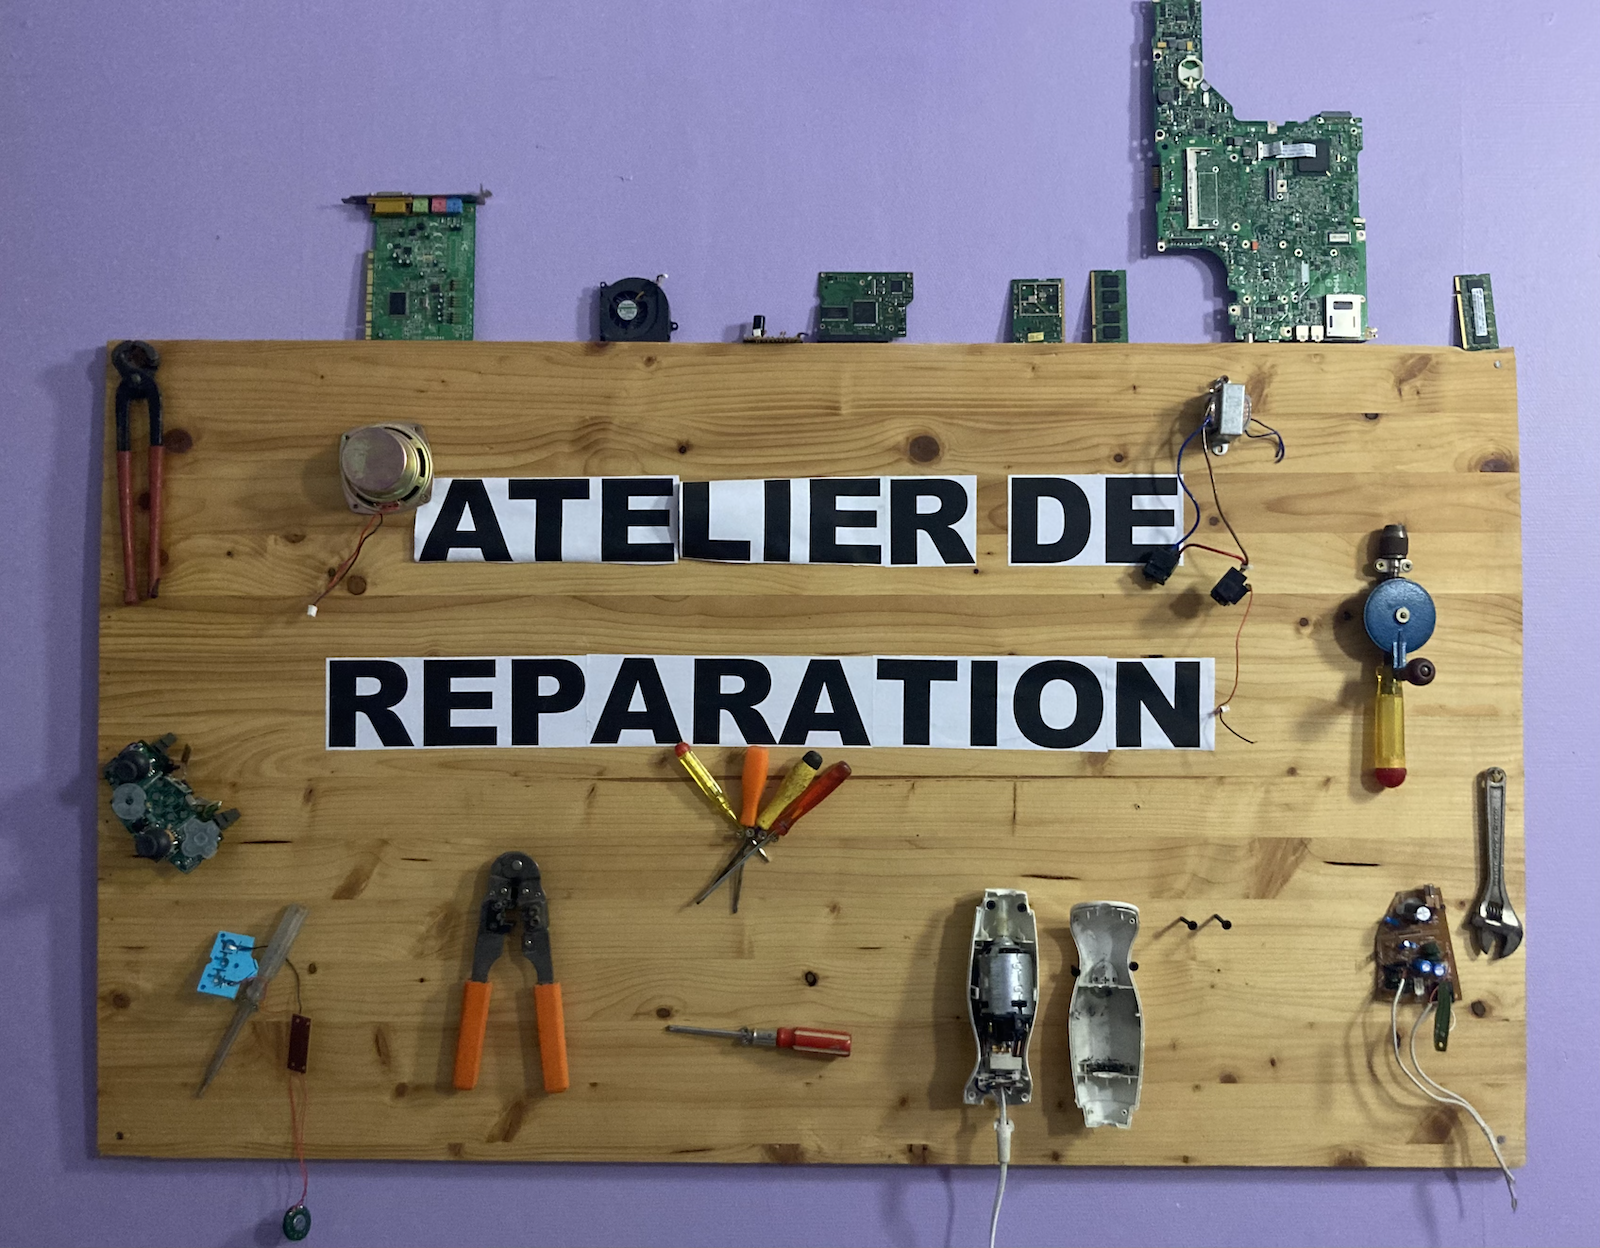 La BOM’s Repair Cafe is open twice a week and is open to all of its members. Credit: Shareable